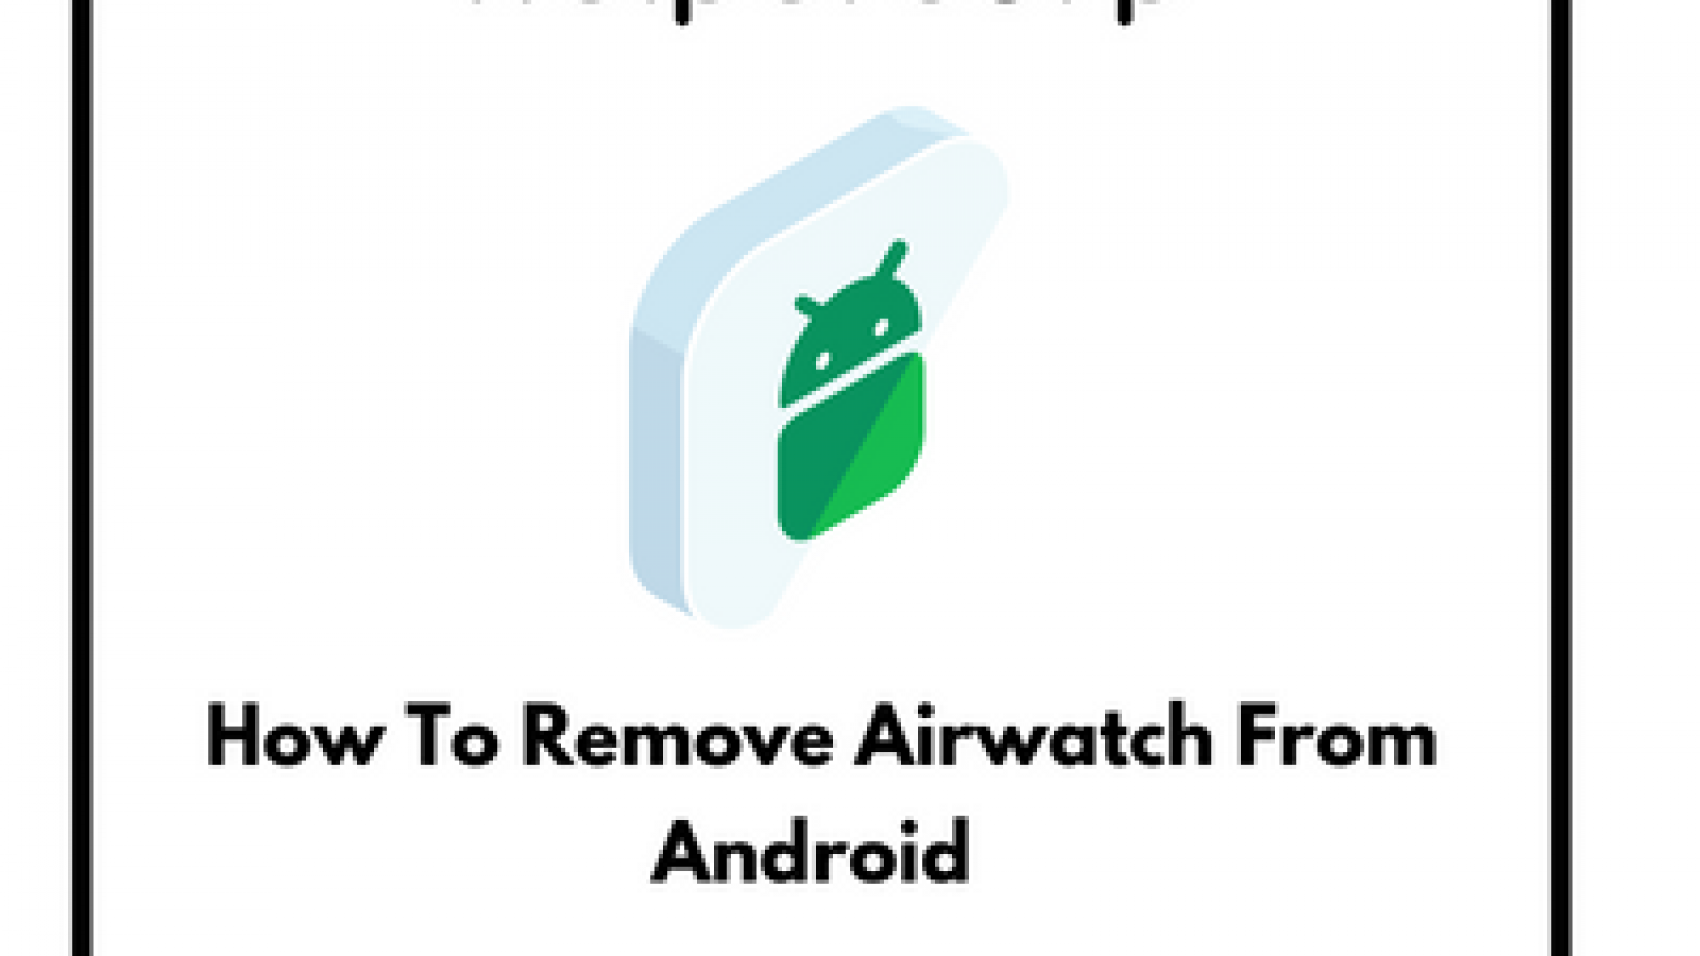 How-To-Remove-Airwatch-From-Android-